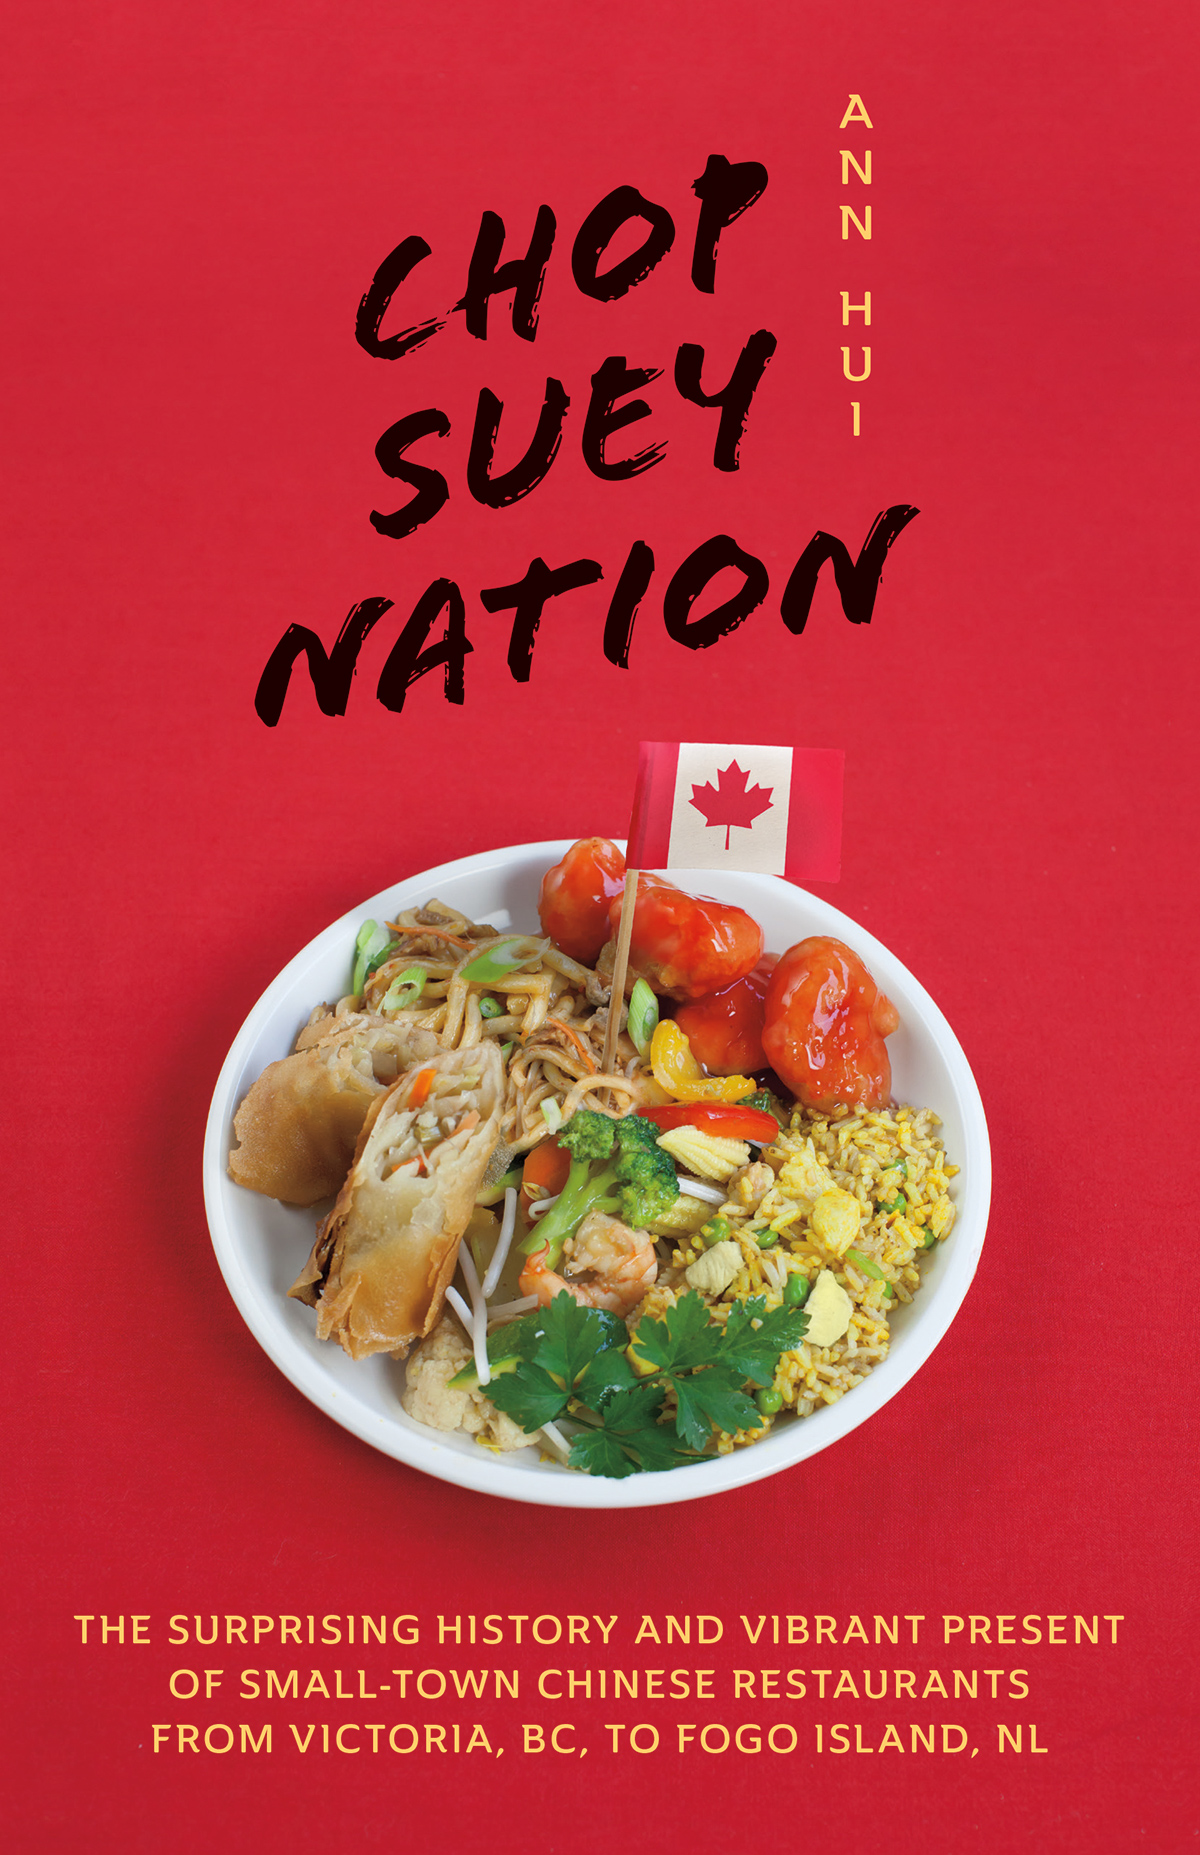 The cover to Chop Suey Nation by Ann Hui. "The Surprising History and Vibrant Present of Small-Town Chinese Restaurants from Victoria, BC, to Fogo Island, NL."